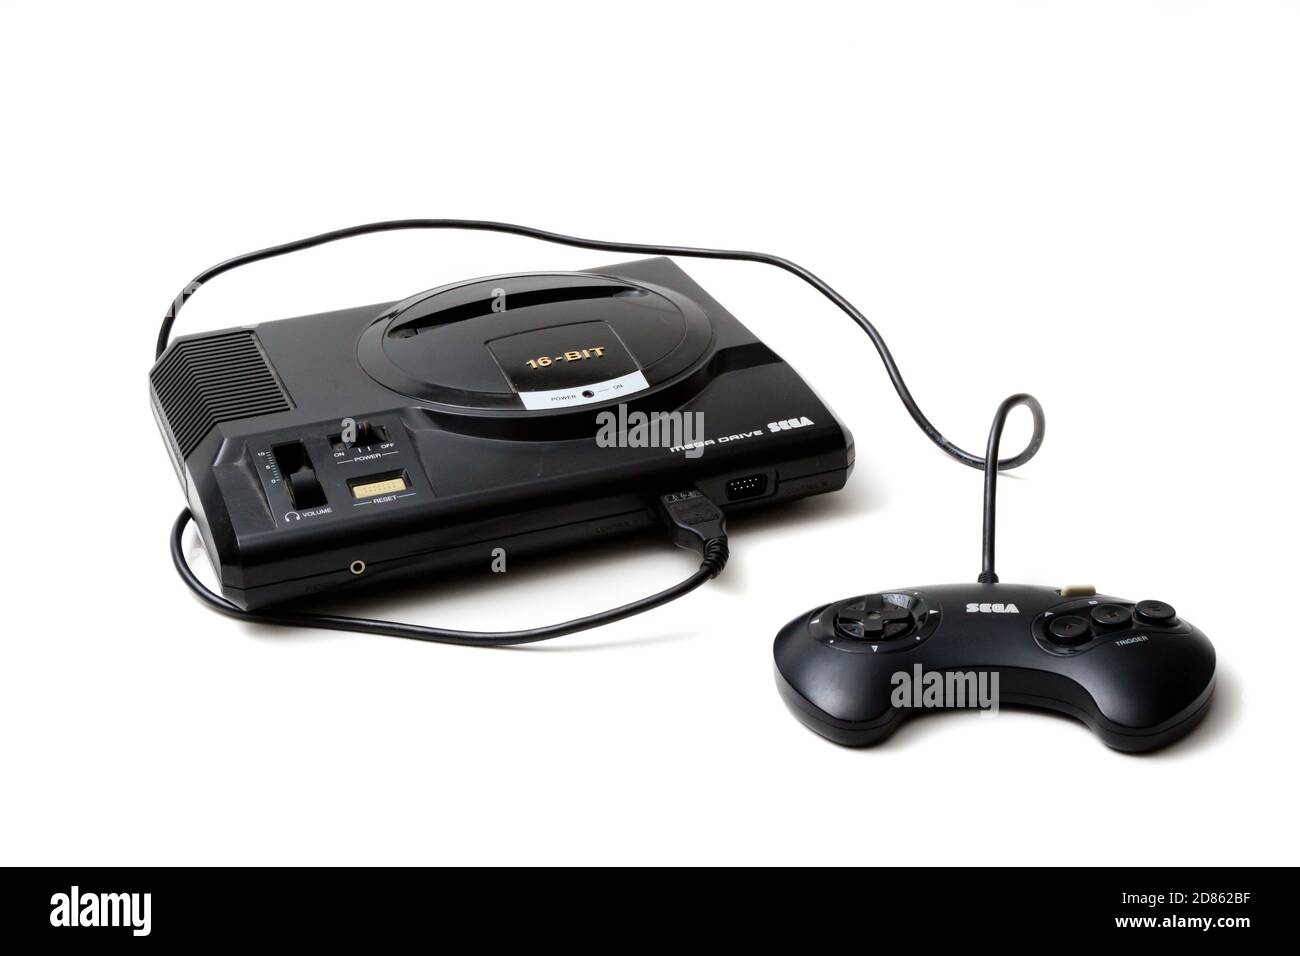 London, United Kingdom, 21st September 2020:- A retro Sega Mega Drive 16-bit gaming console and controller isolated on a white background Stock Photo